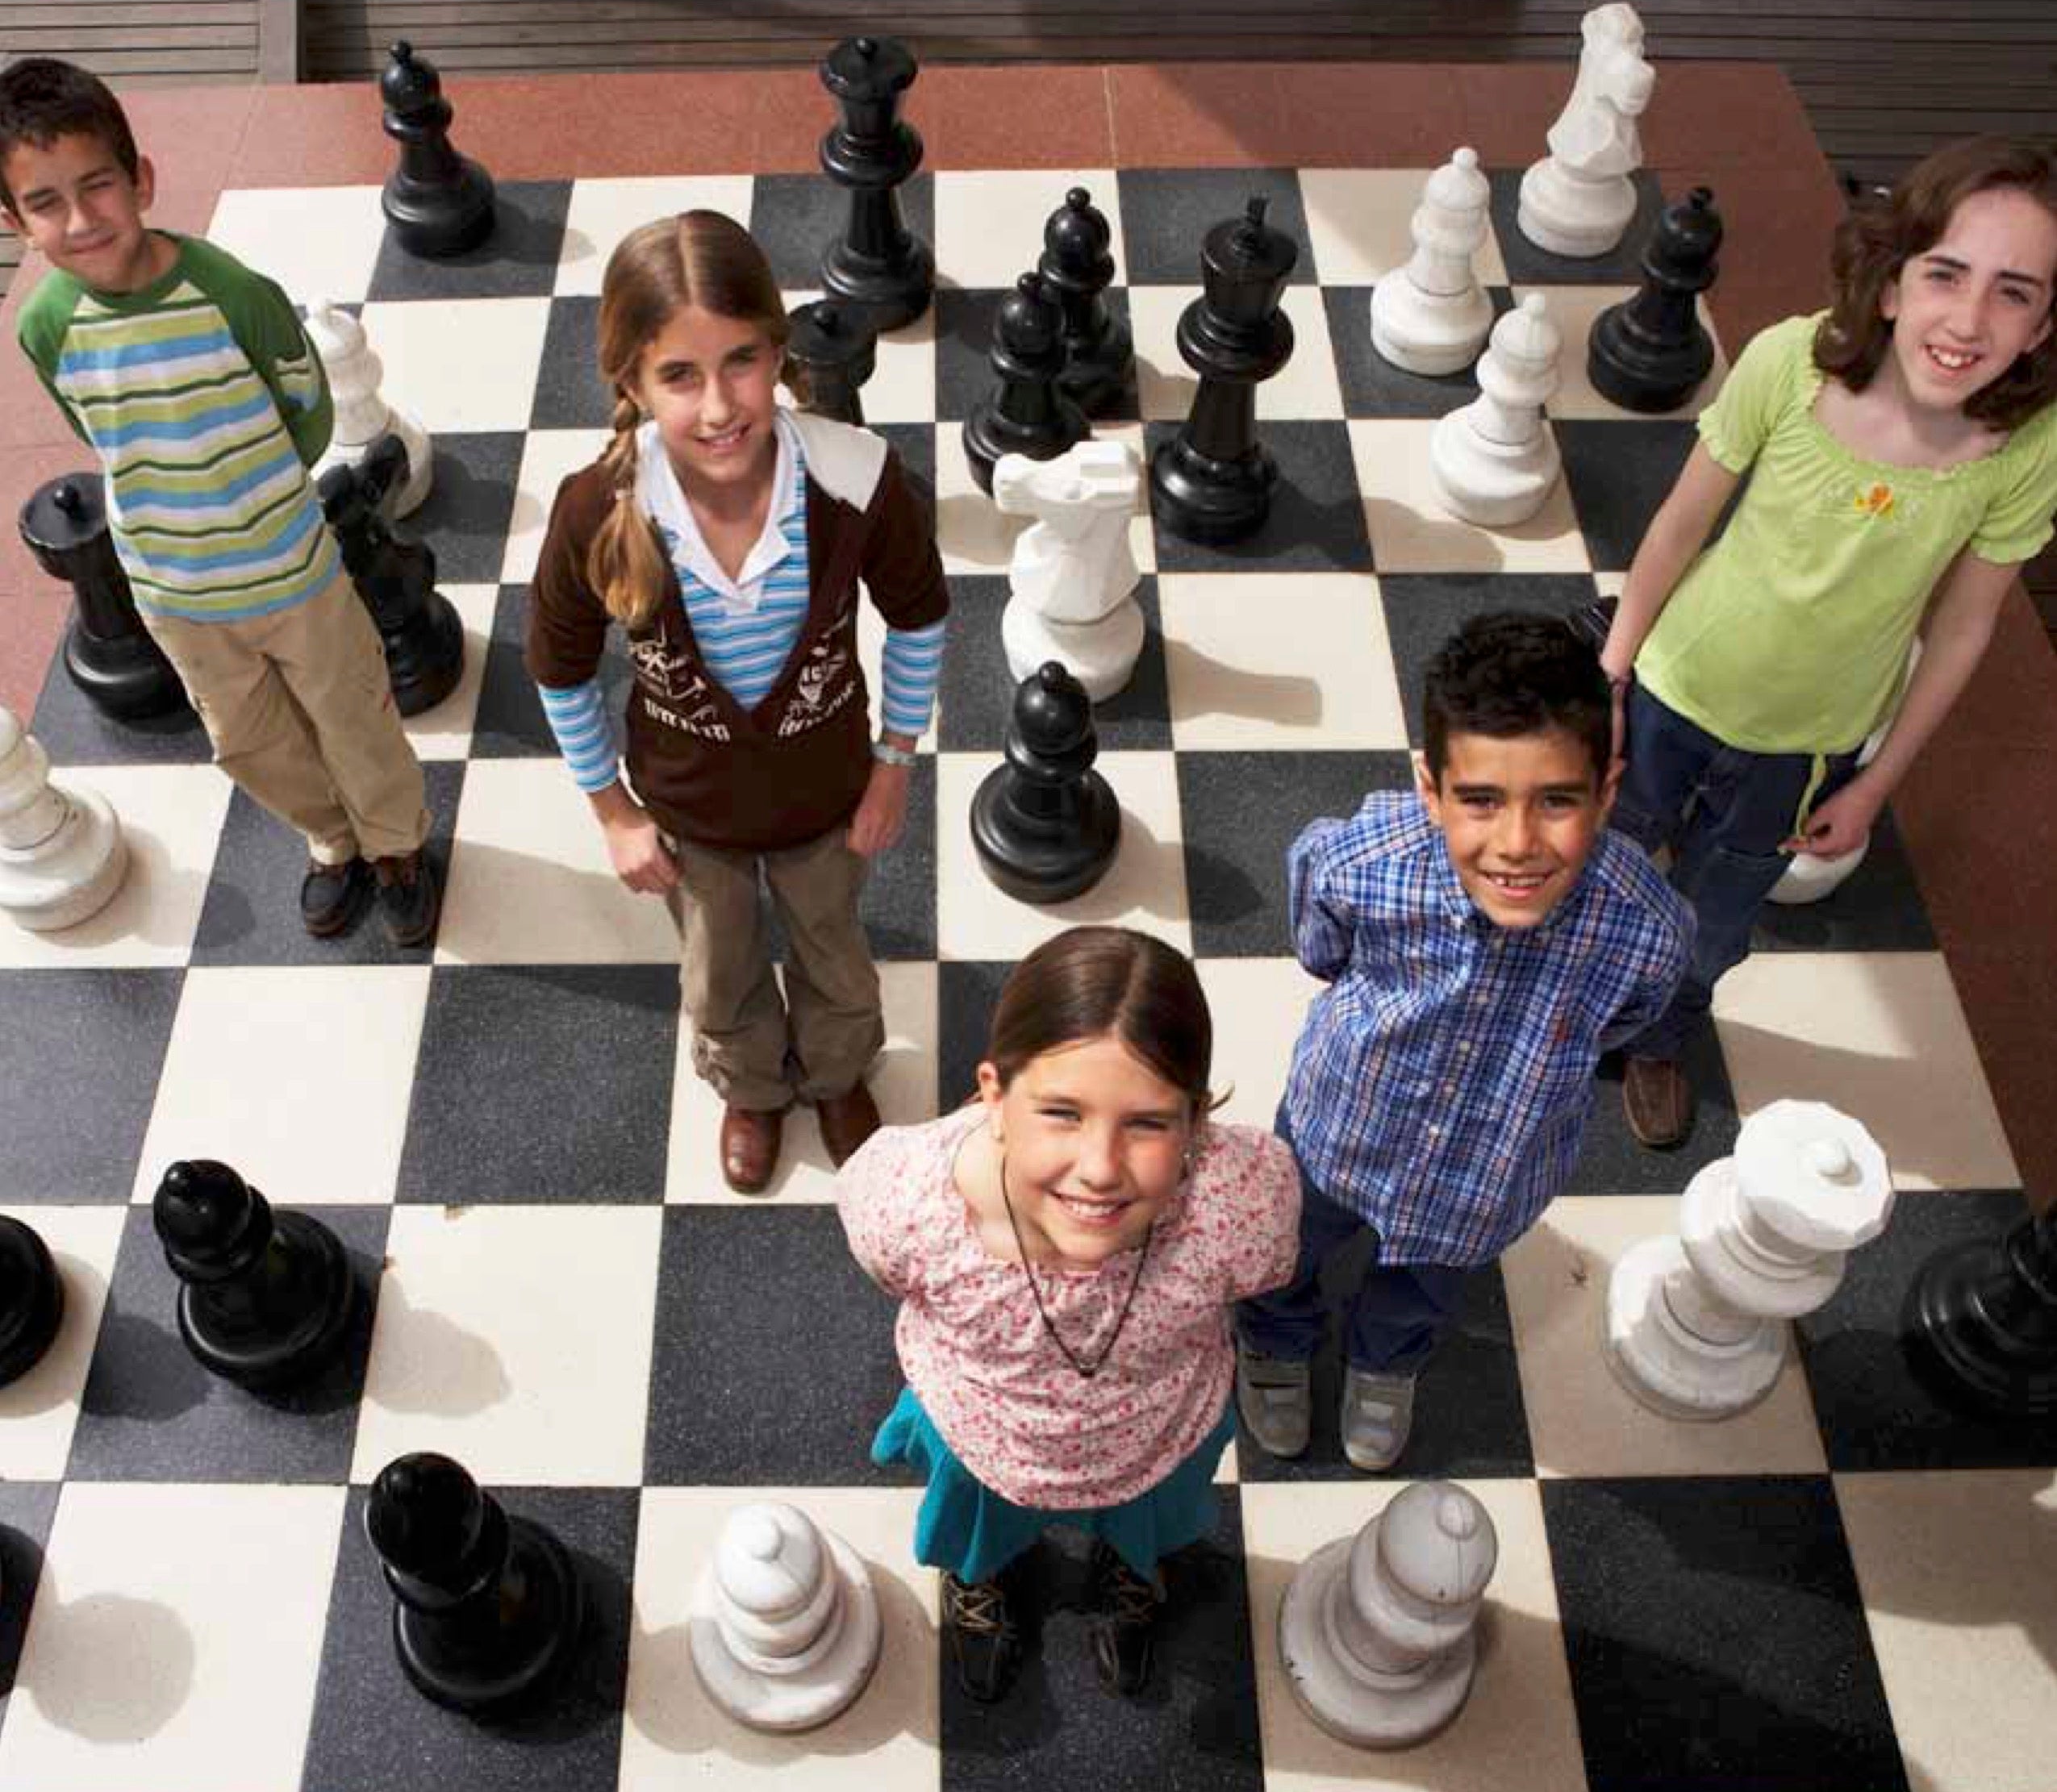 Children stand amongst life-sized chess pieces and look up to smile towards the camera.